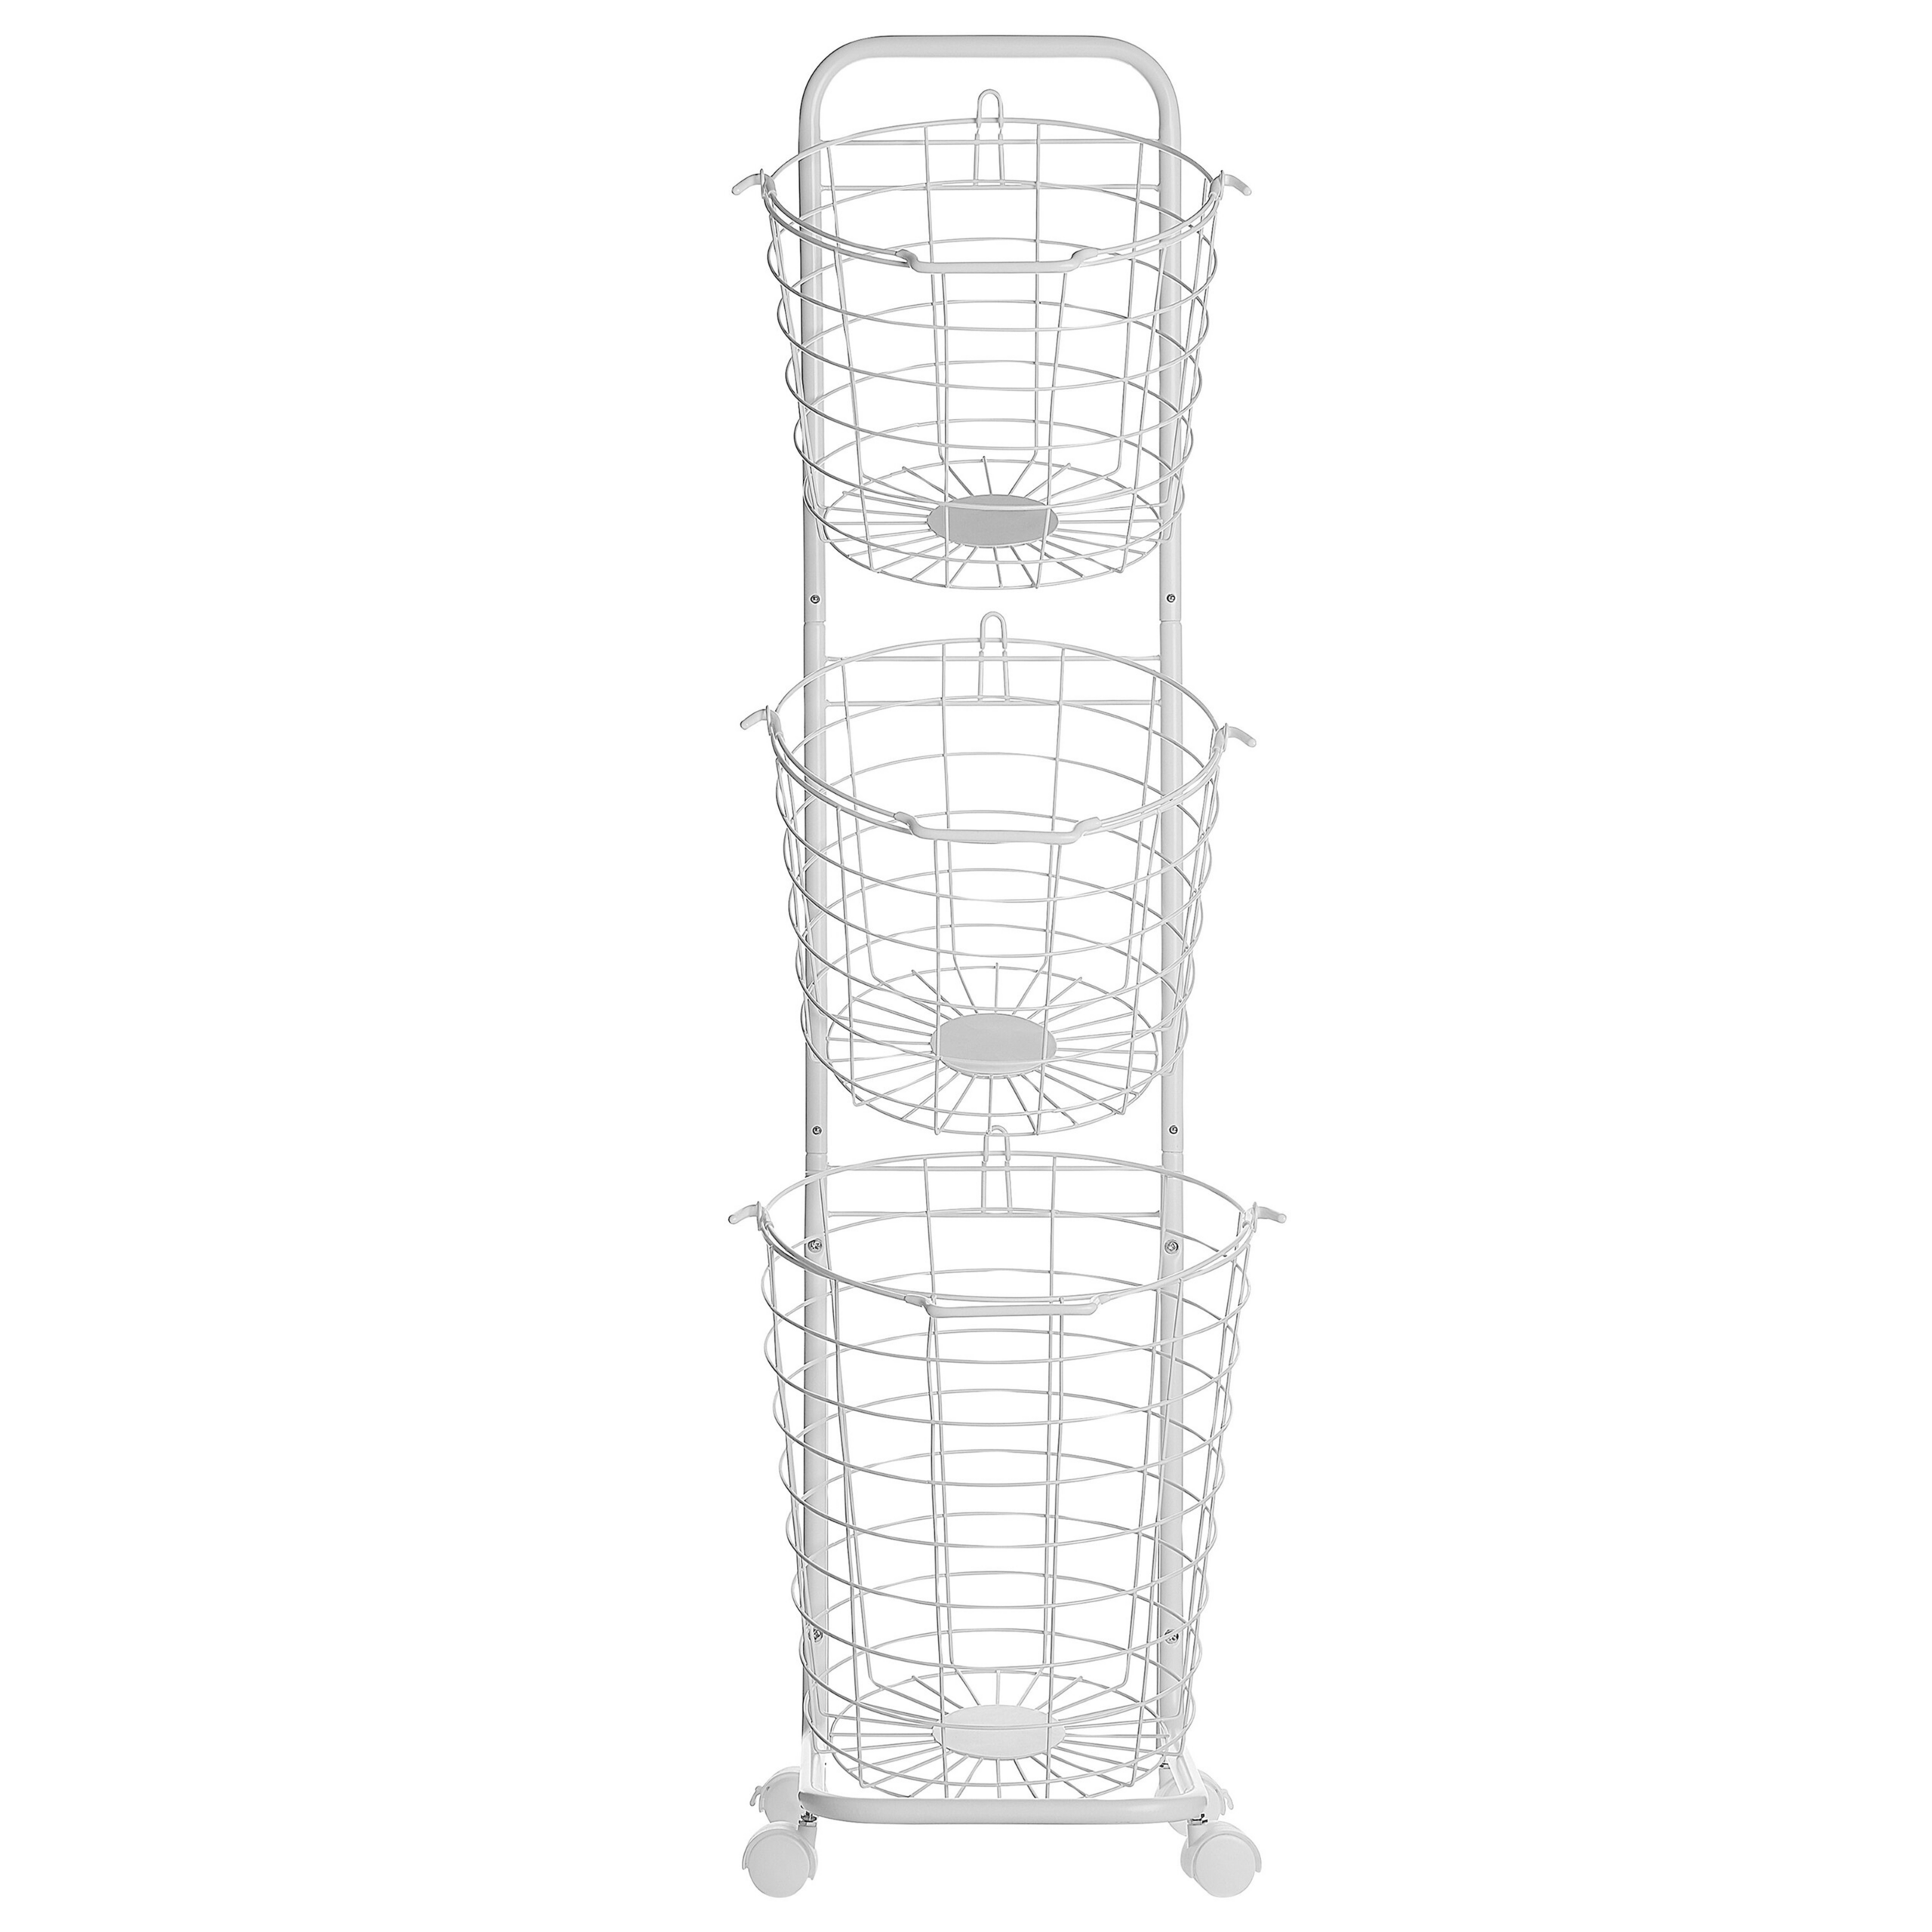 Beliani 3 Tier Wire Basket Stand White Metal with Castors Handles Detachable Kitchen Bathroom Storage Accessory for Towels Newspaper Fruits Vegetables Material:Metal Size:27x123x37